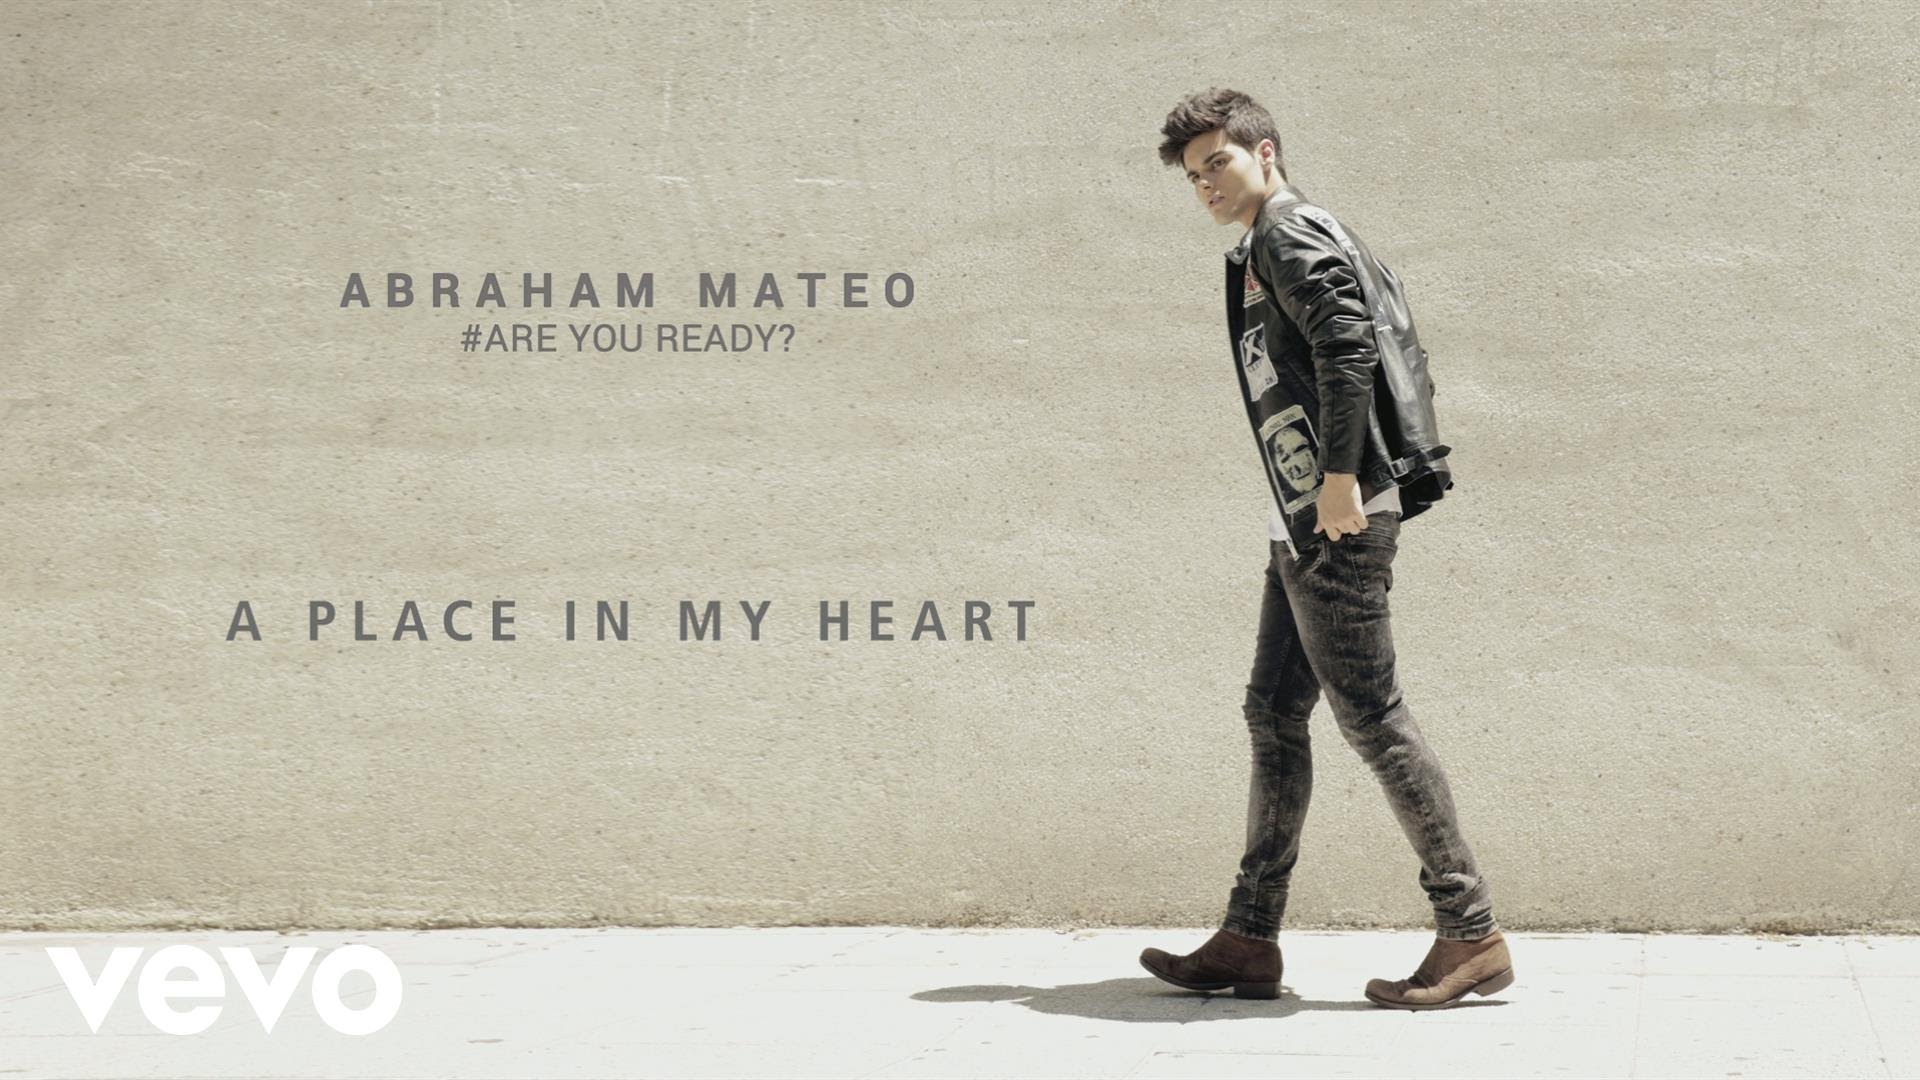 Abraham Mateo - A place in my heart